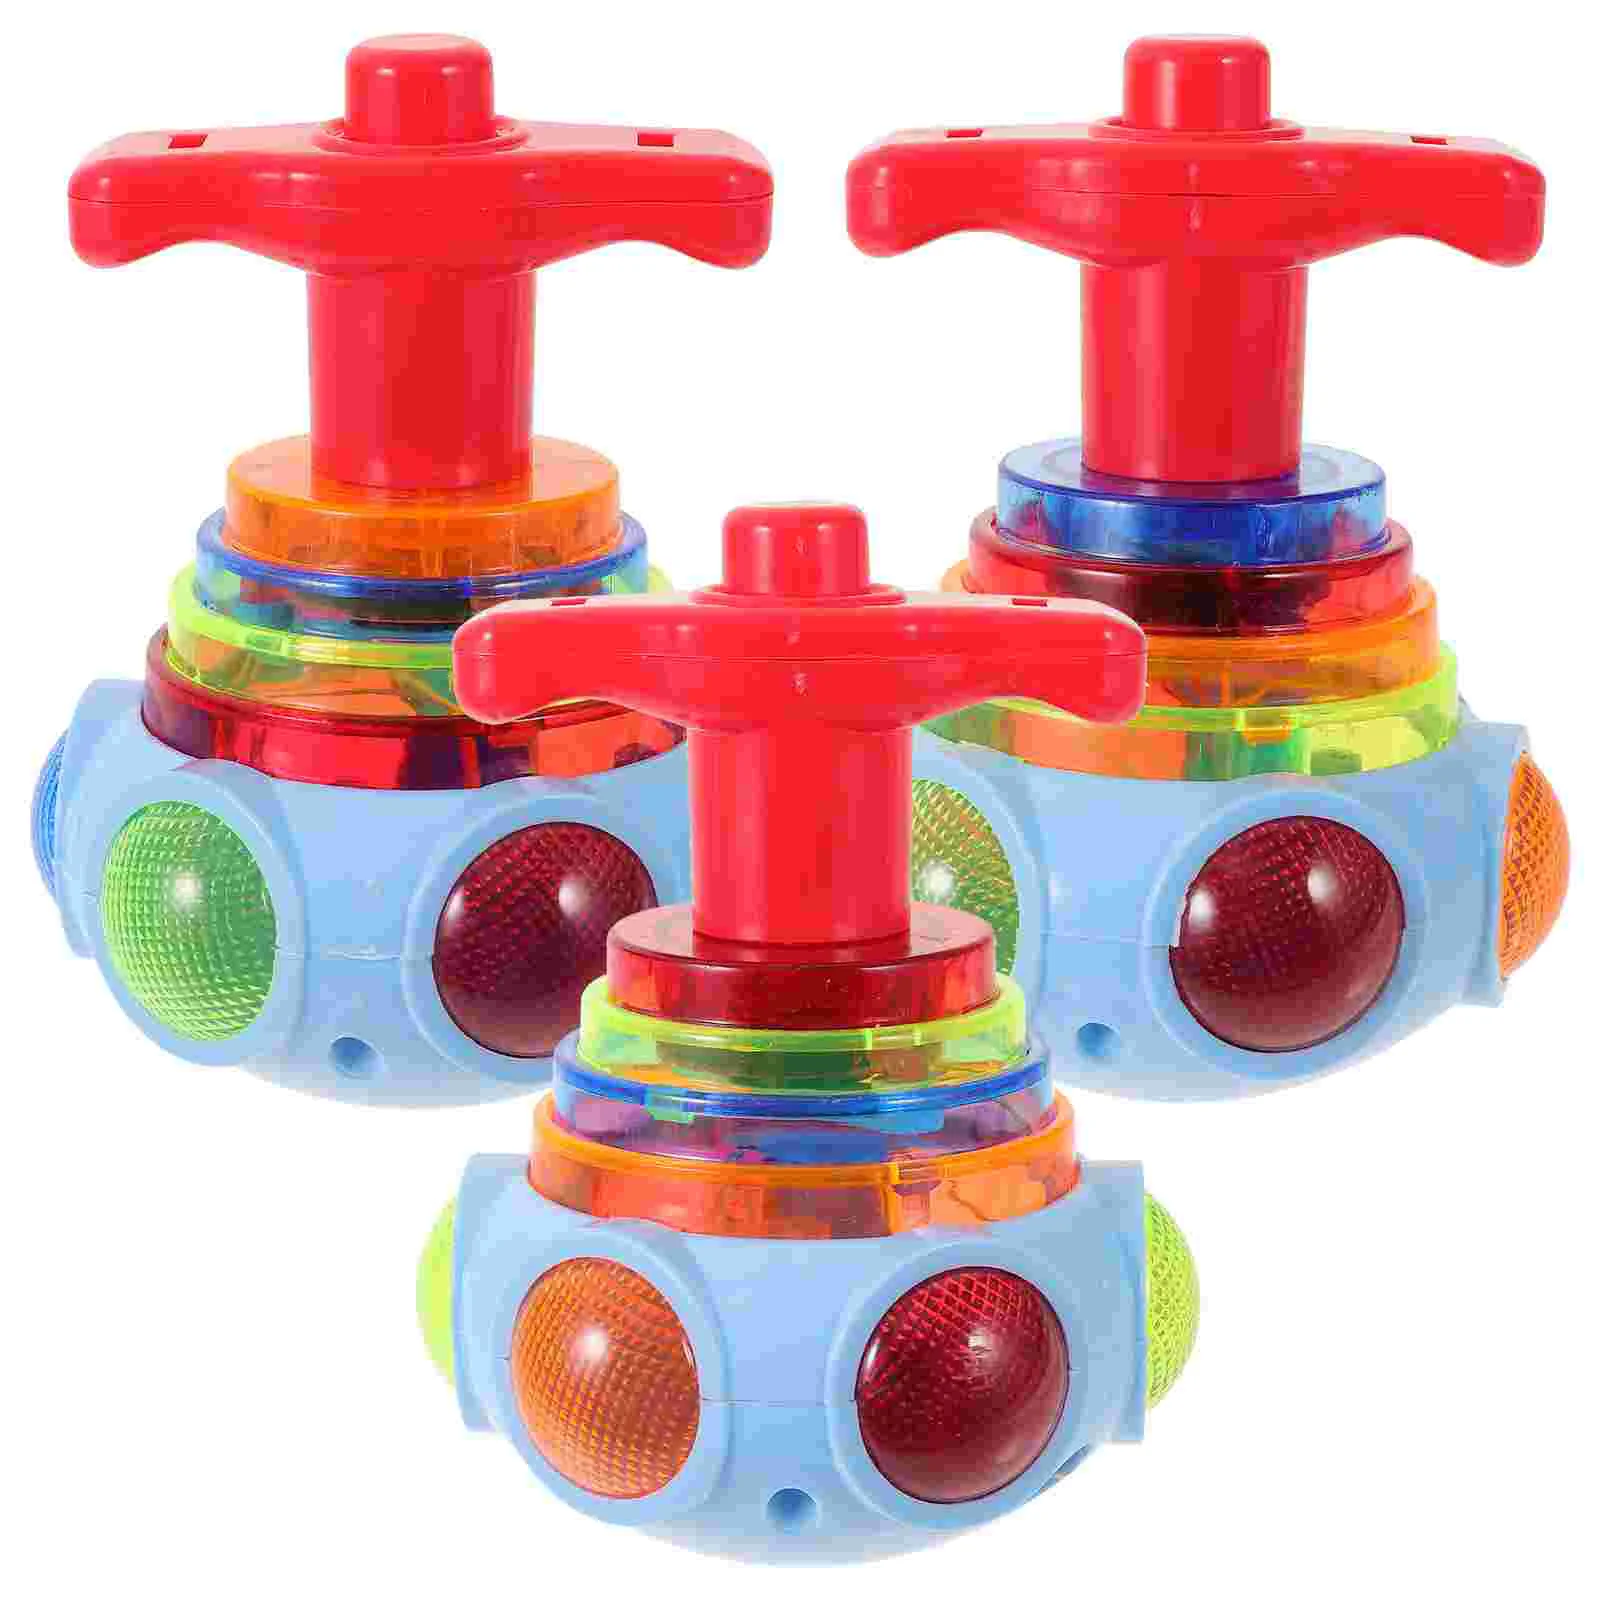 

3pcs Light Tops for Kids Novelty Musical Flashing Spinners with Gyroscope Fun Tops for Kids Party Favors Prize Great Gift ( )